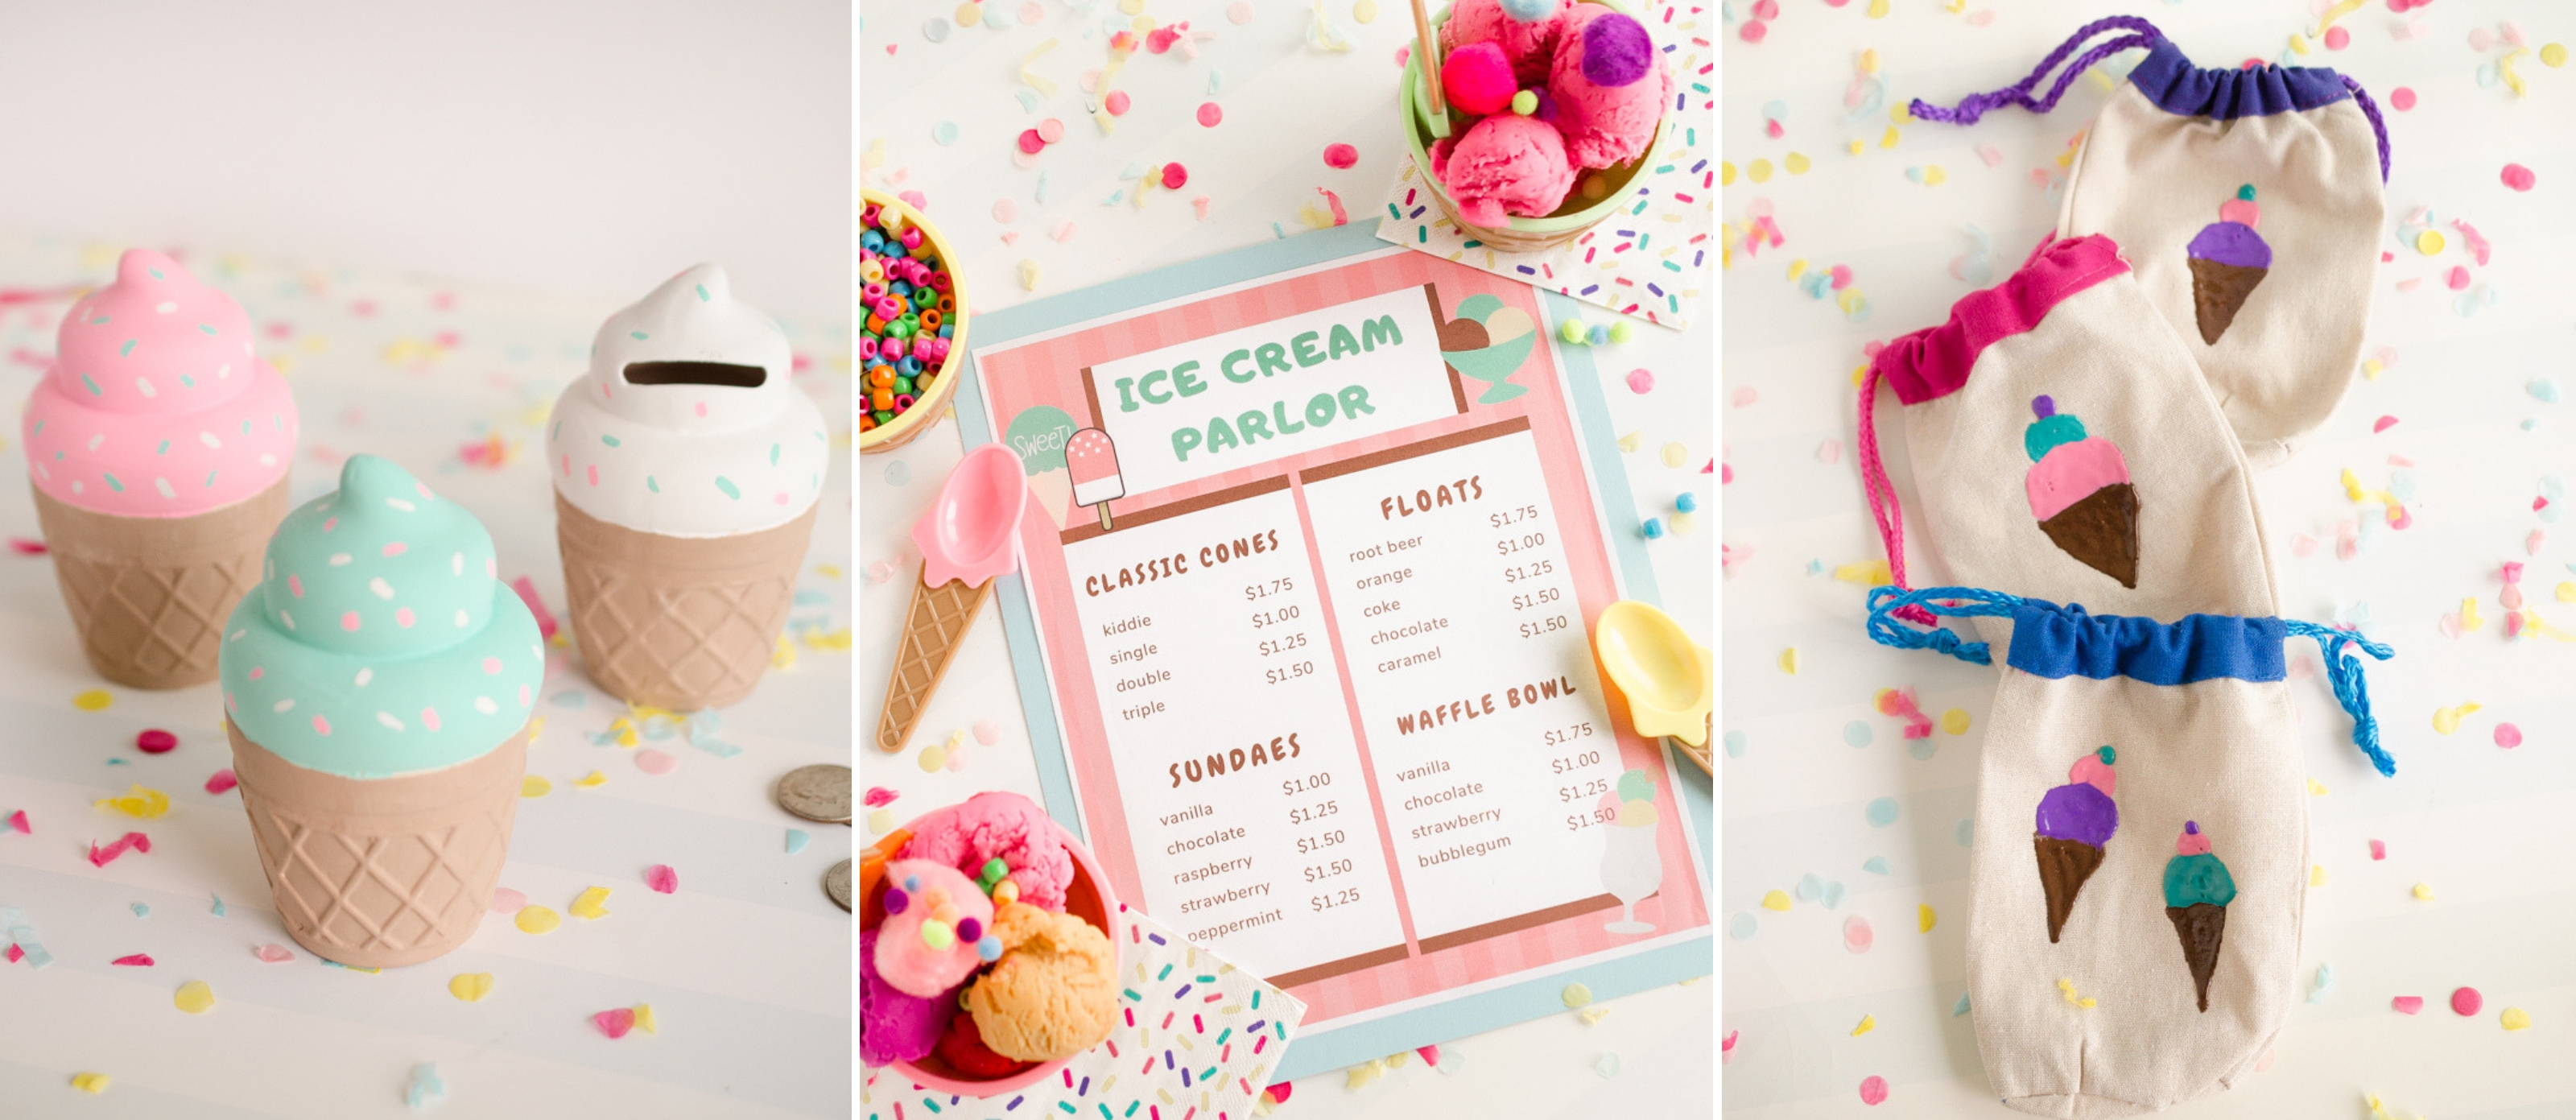 Colorful Cardboard Ice Cream Cone Craft for Kids - Crafting A Fun Life